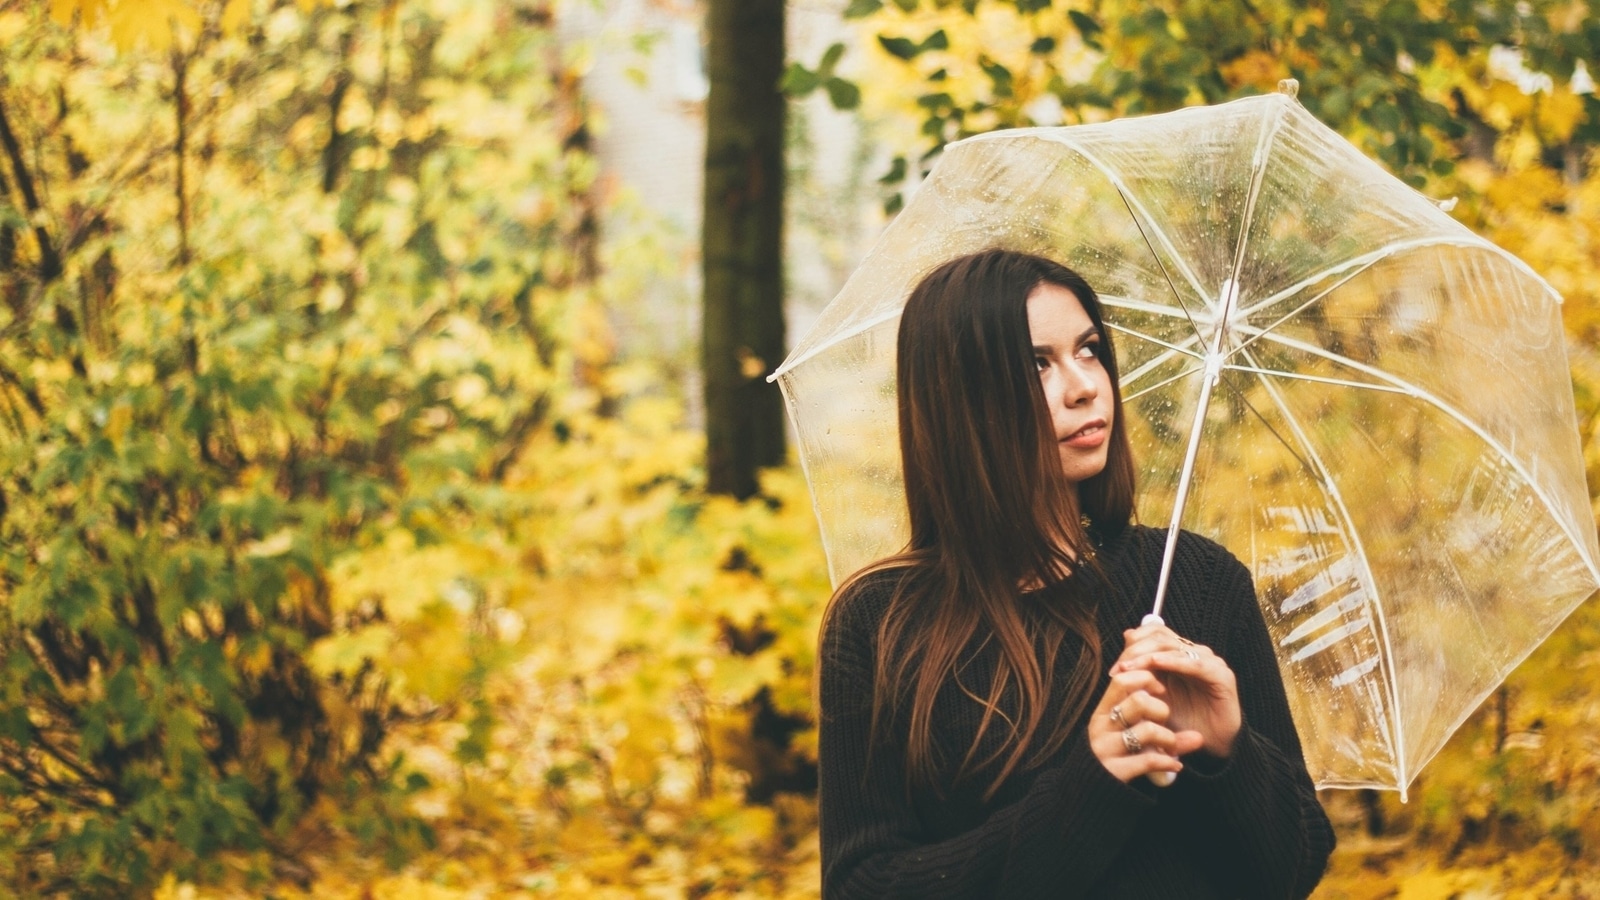 Noticing excessive hair fall during the rains? Here’s how you can treat it